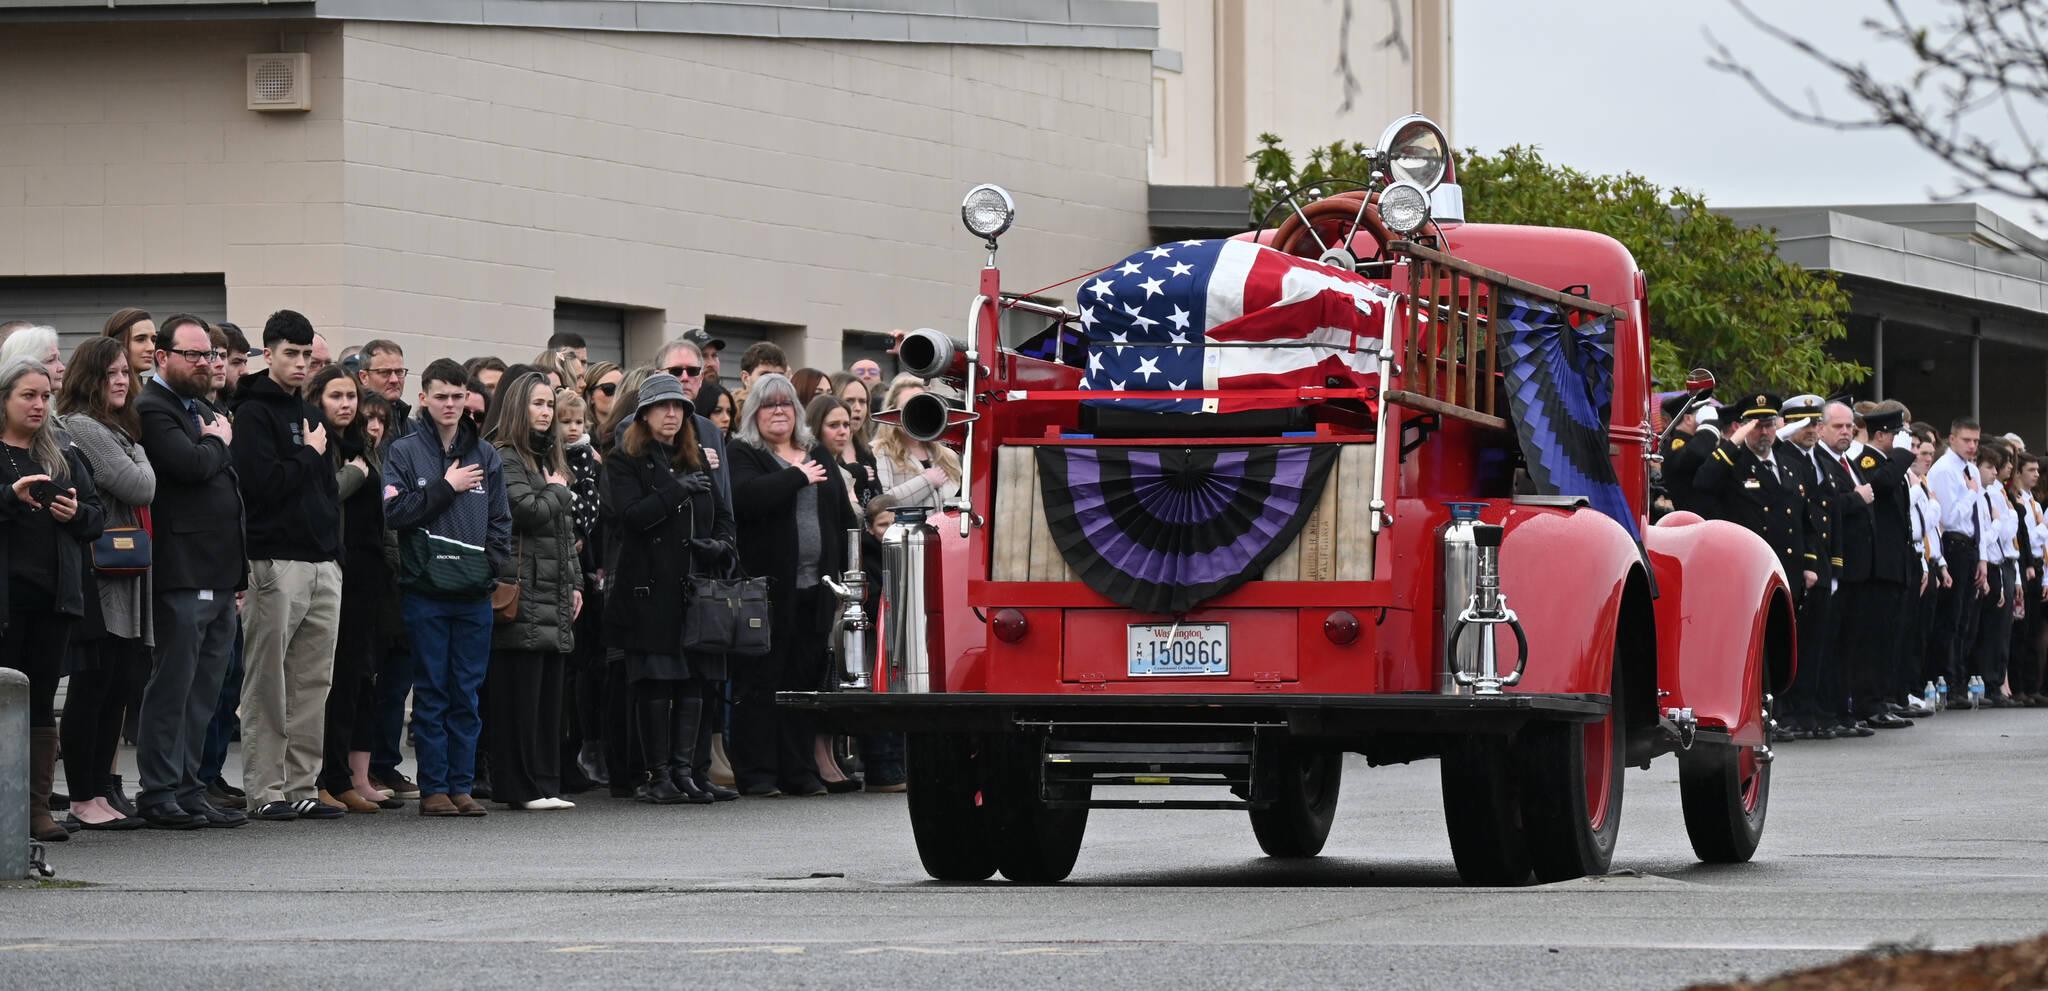 Sequim Gazette photos by Michael Dashiell
Attendees of the Jan. 21 memorial for Capt. Charles “Chad” Cate look on as the antique fire truck transporting Cate’s coffin arrives at Sequim High School.